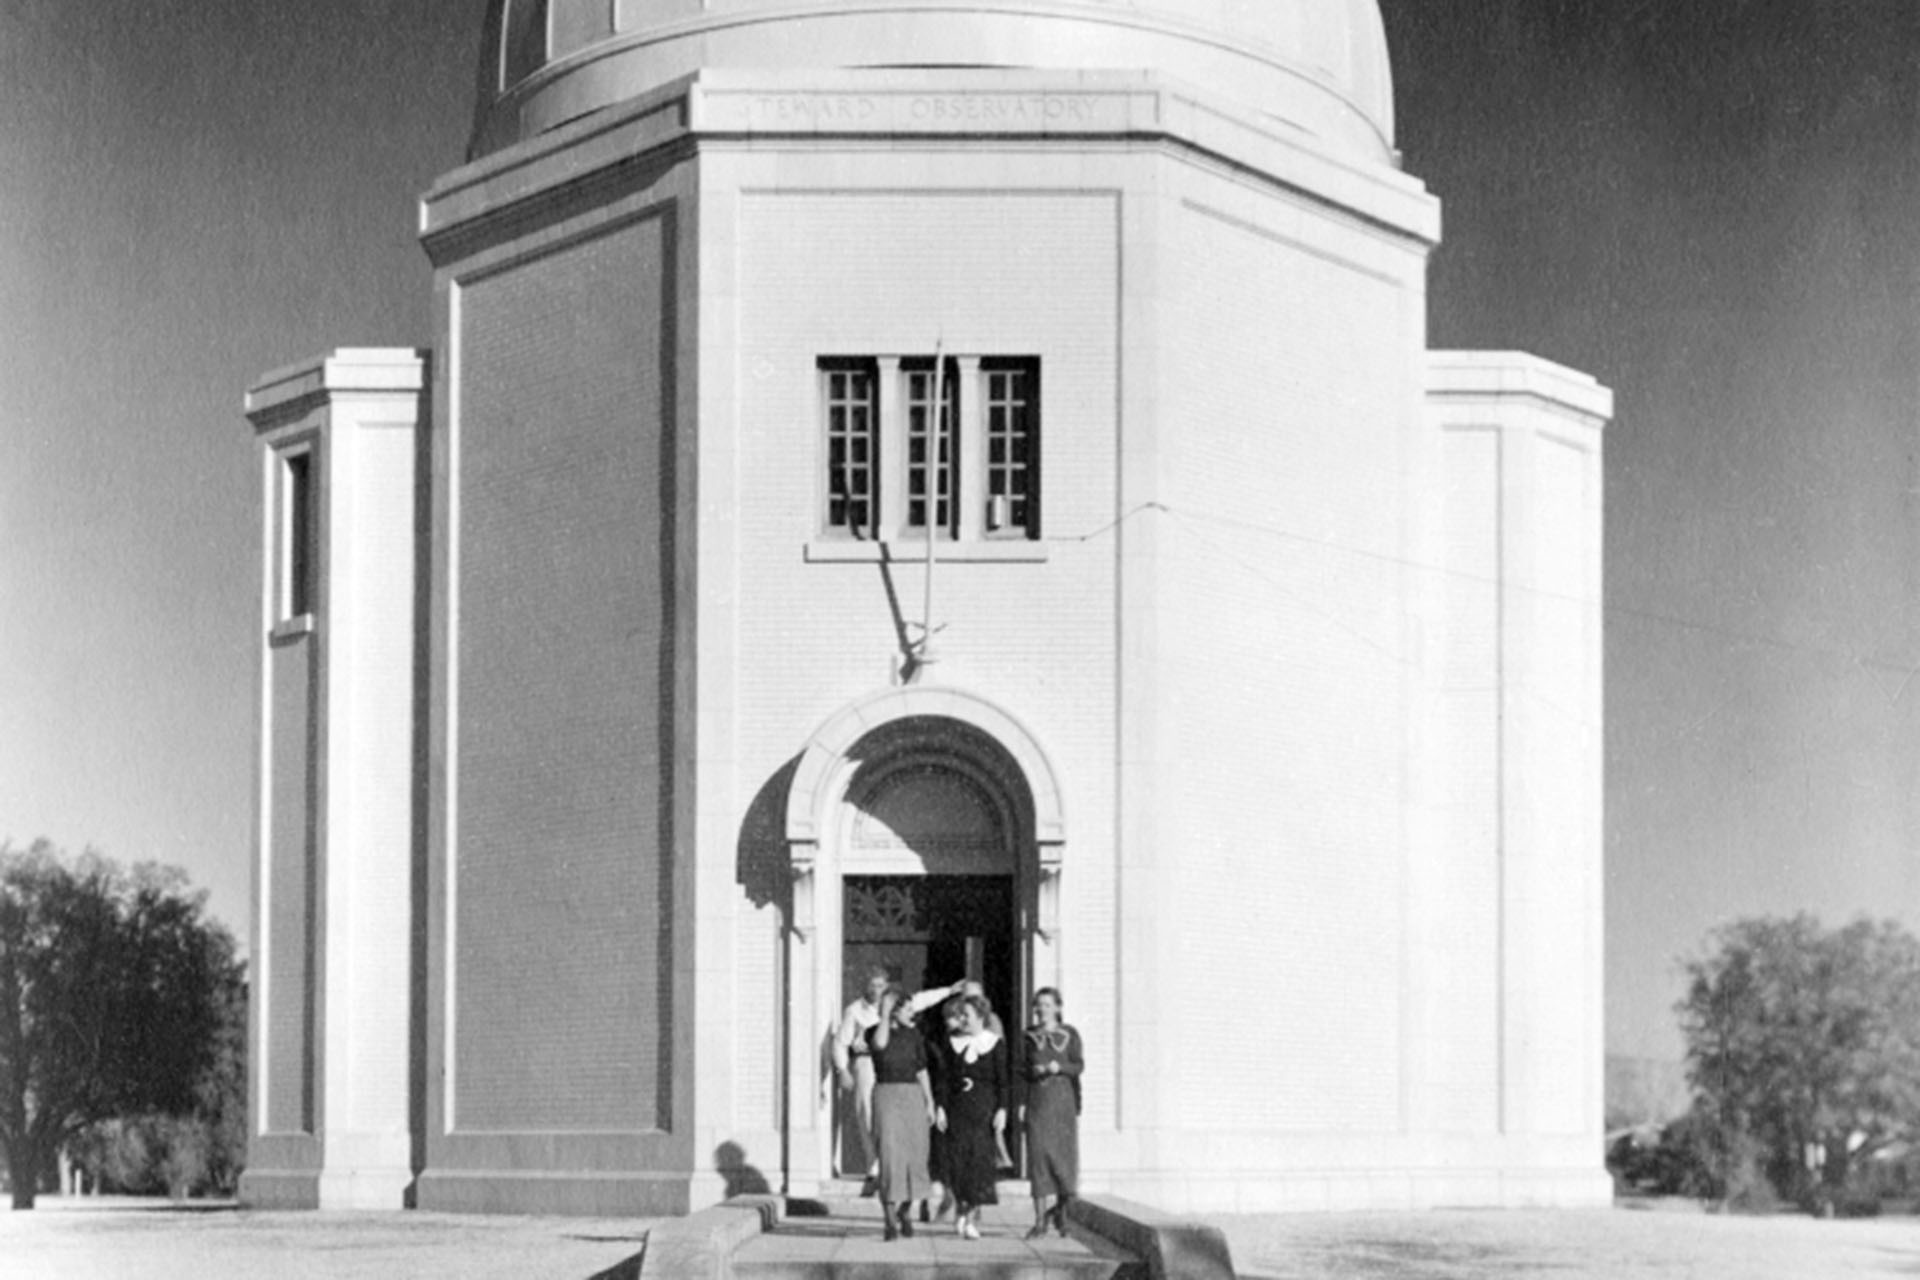 A photograph of five individuals standing outside of the Steward Observatory dome